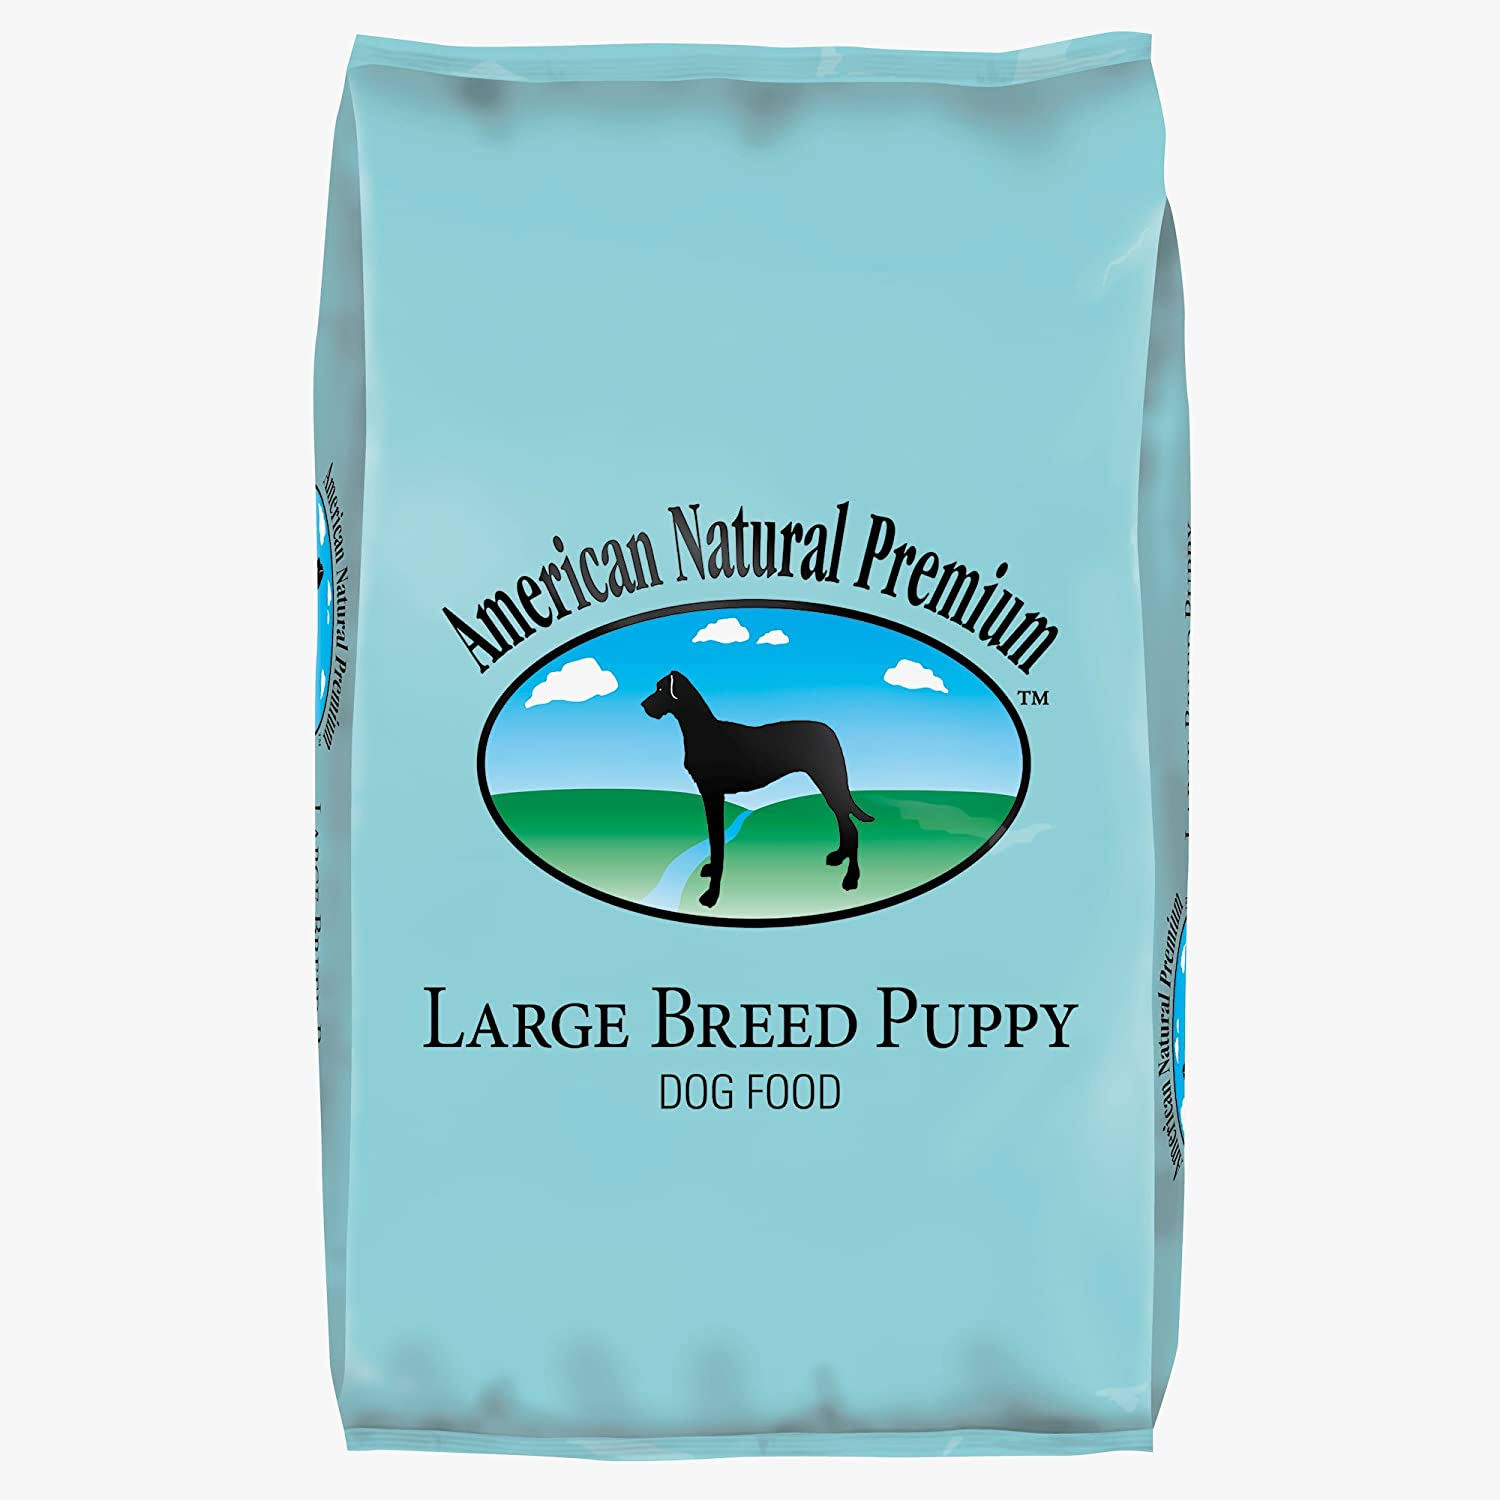 American Natural Premium, Large Breed Puppy Food, 12lbs